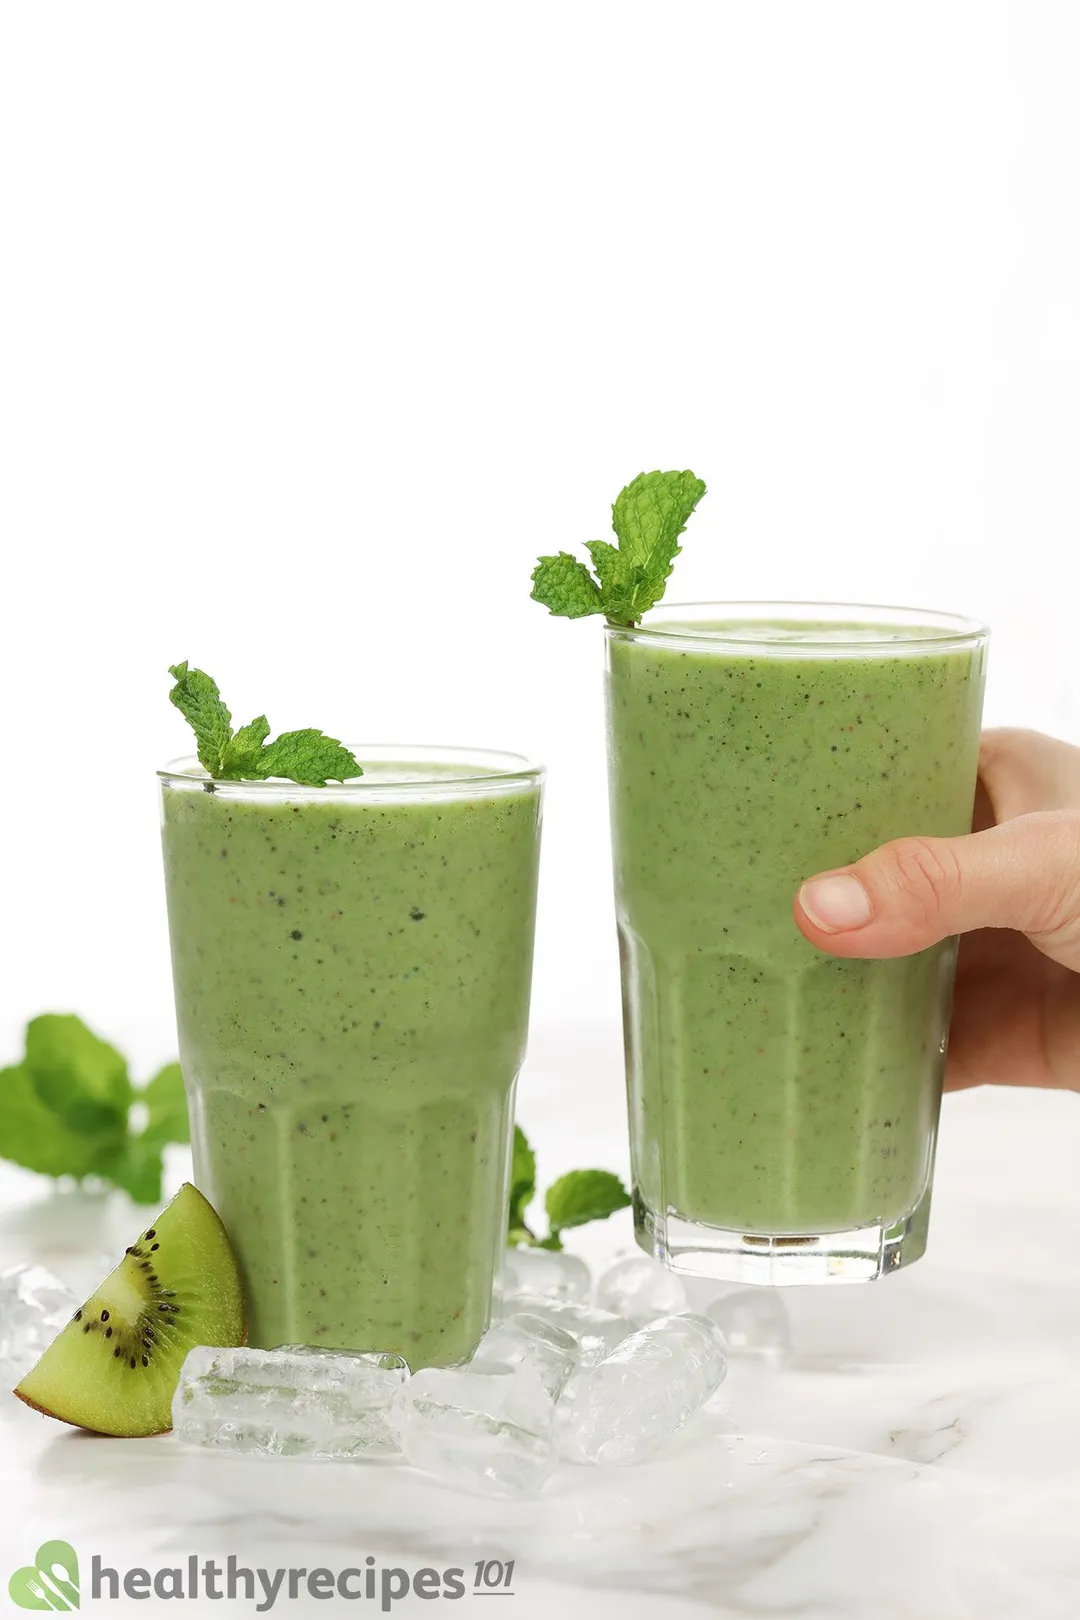 A hand picking up a glass of kiwi smoothie placed next to an identical glass. They're both placed on a white cloth with a slice of green kiwi and mint leaves near by.